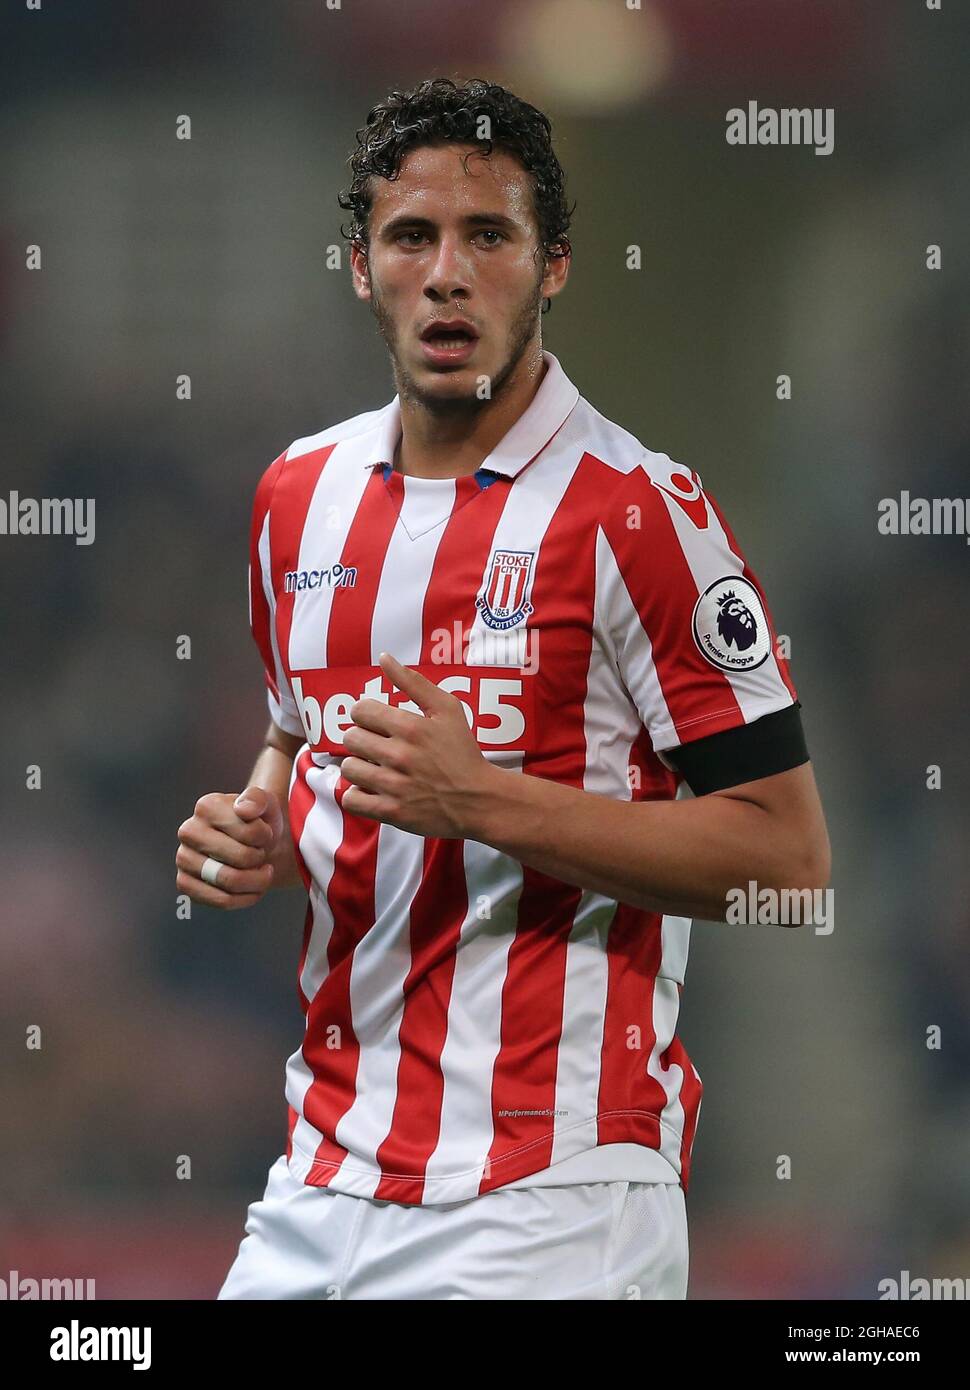 Ramadan Sobhi of Stoke City during the Premier League match at the Britannia Stadium, Stoke on Trent. Picture date: October 31st, 2016. Pic Simon Bellis/Sportimage via PA Images Stock Photo